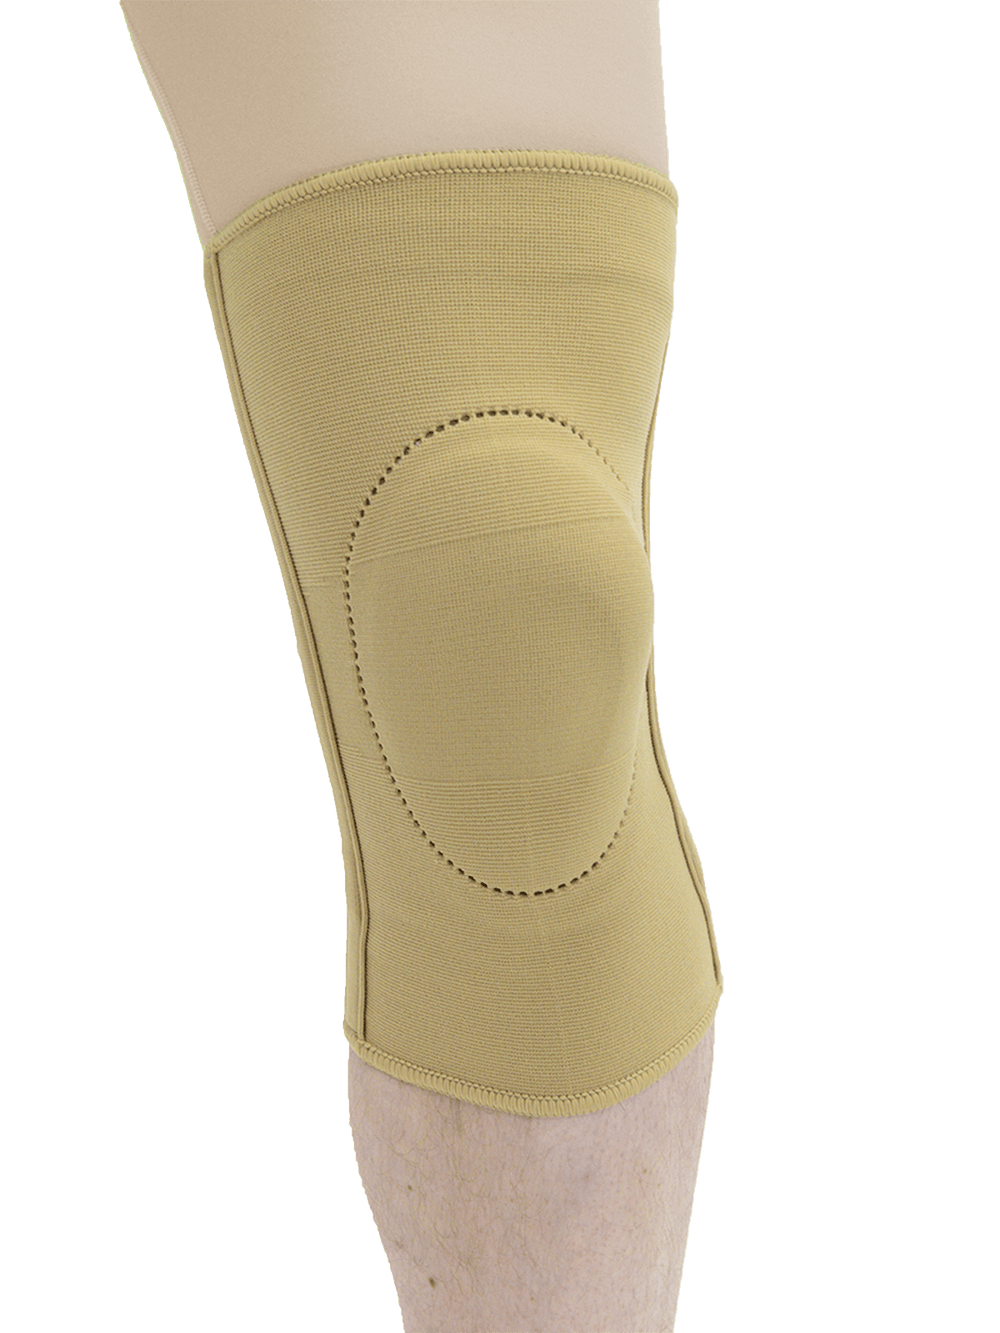 MAXAR Elastic Knee Brace with Donut-Shaped Silicone Ring and Metal Stays - Beige